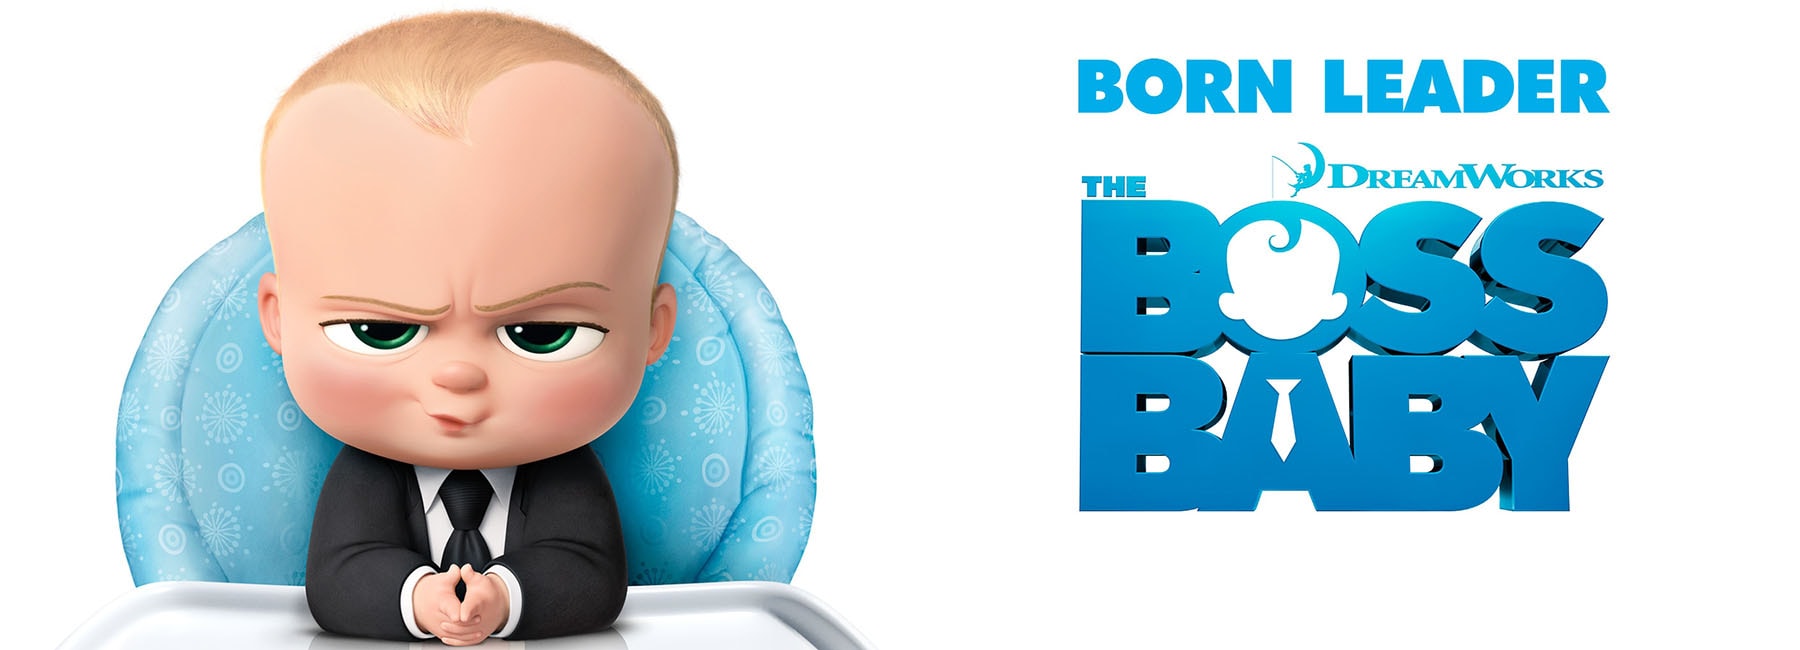 The Boss Baby 4K 2017 big poster